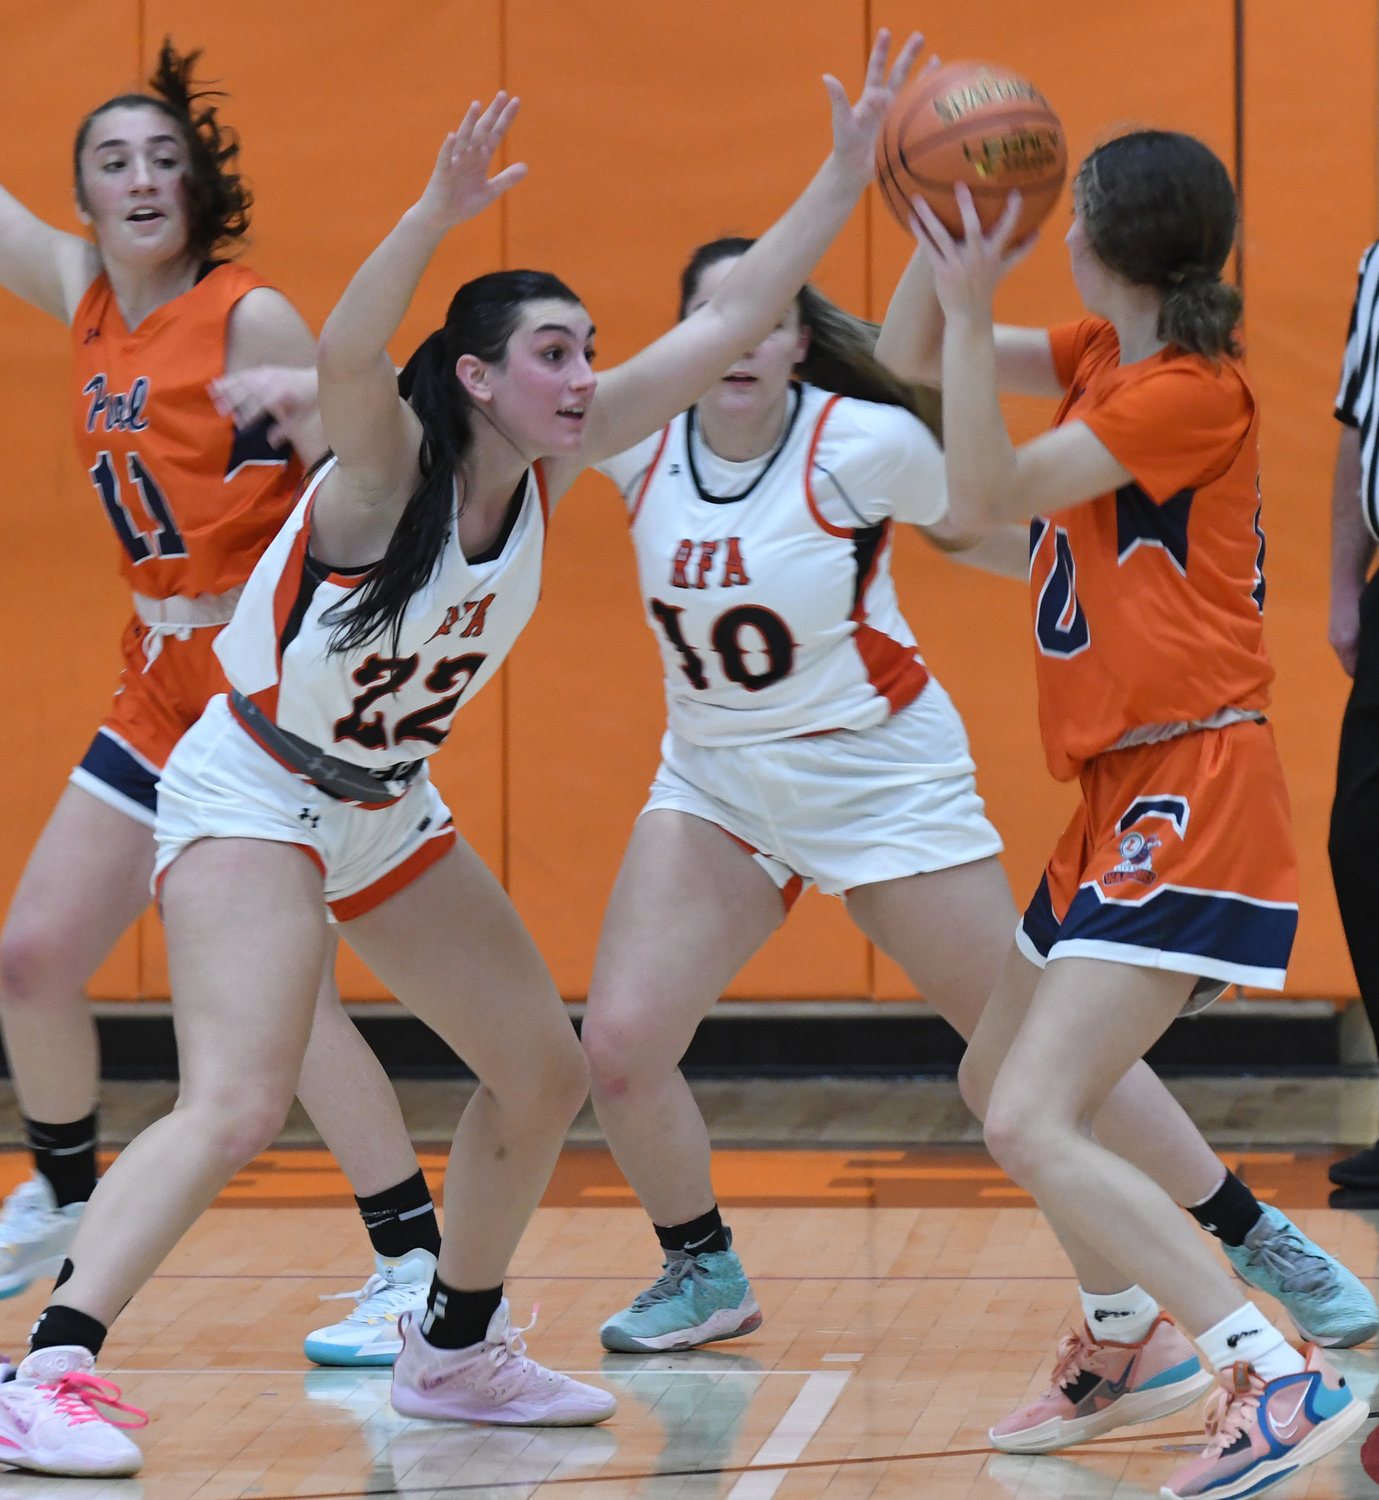 Rome Free Academy seniors Mia Mirabelli, left, and Raelyn Dole defend as Liverpool's Kaylyn Sweeney looks for a passing lane in the first half Tuesday night at RFA. RFA won 68-64 in overtime.